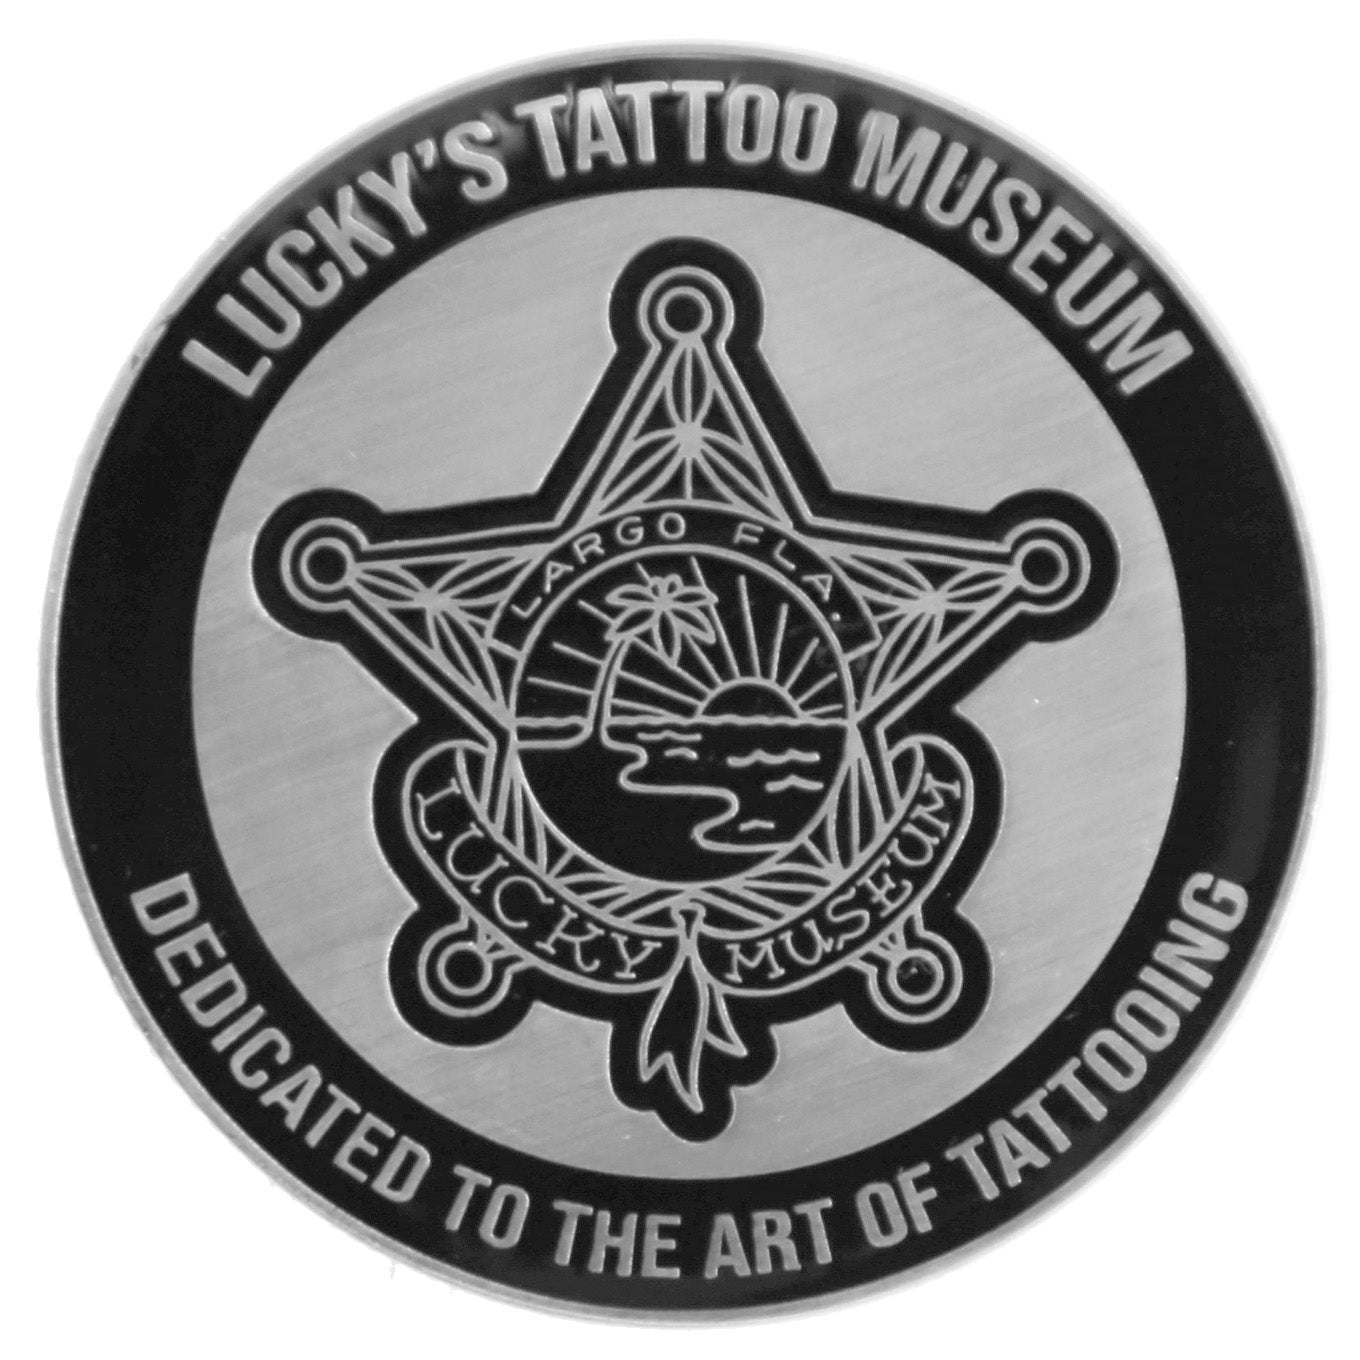 Lucky's Tattoo Museum 20 Year Anniversary Commemorative Coin